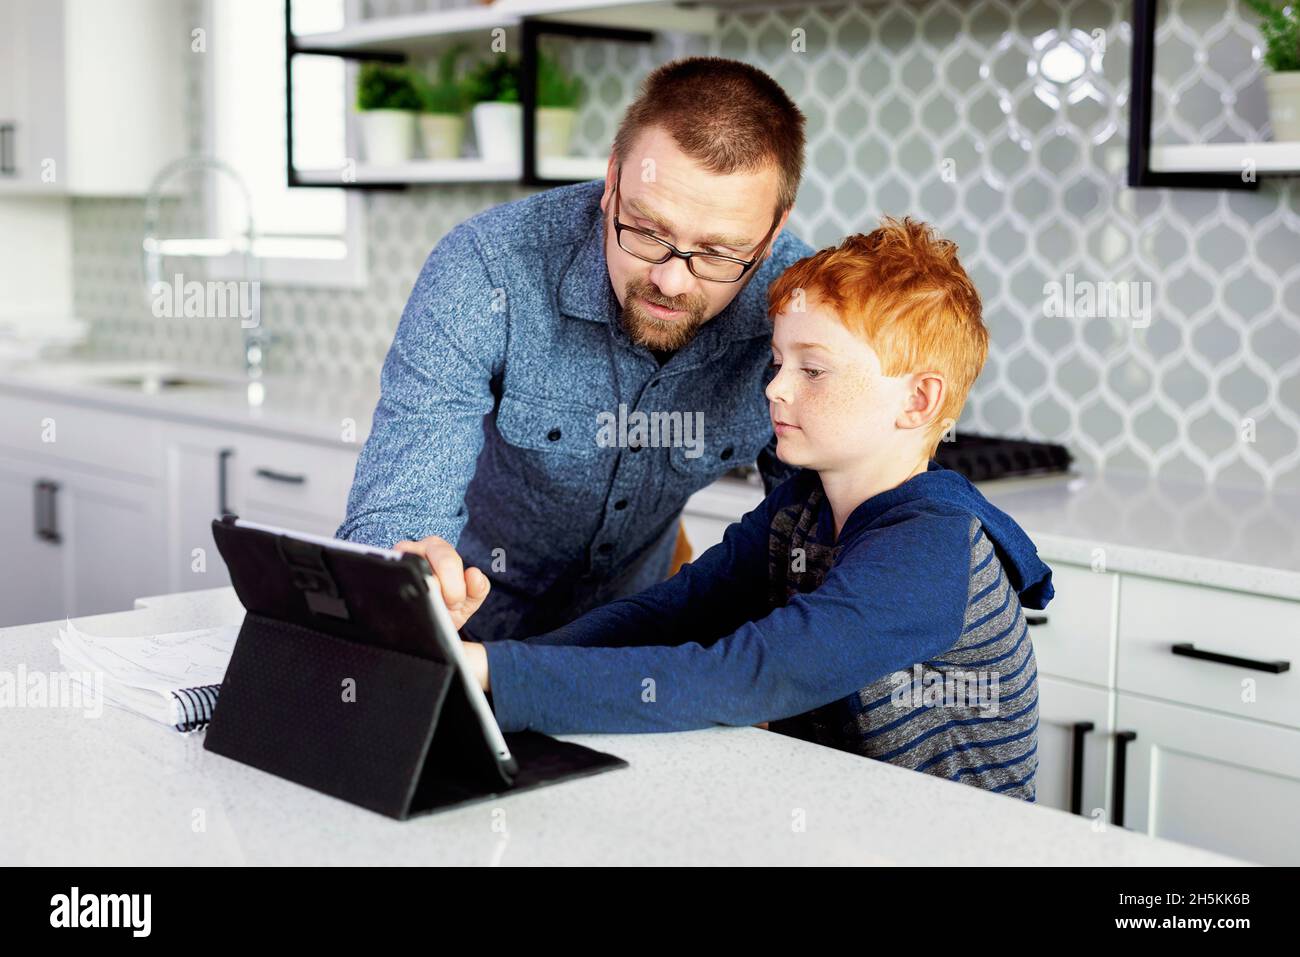 Father helping son with homework in the home kitchen; Edmonton, Alberta, Canada Stock Photo